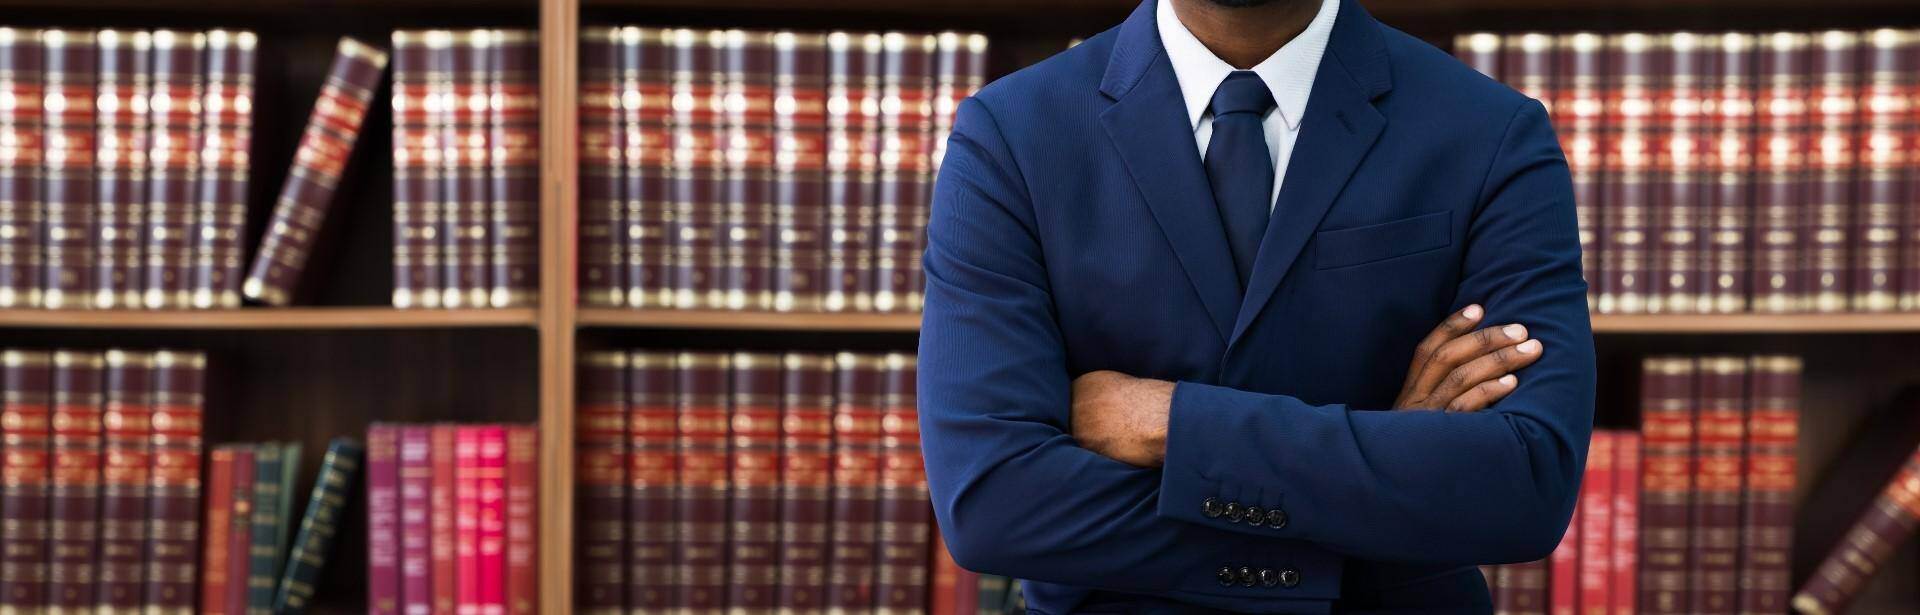 A black lawyer standing in front of a bookshelf of law book in Valdosta, Georgia